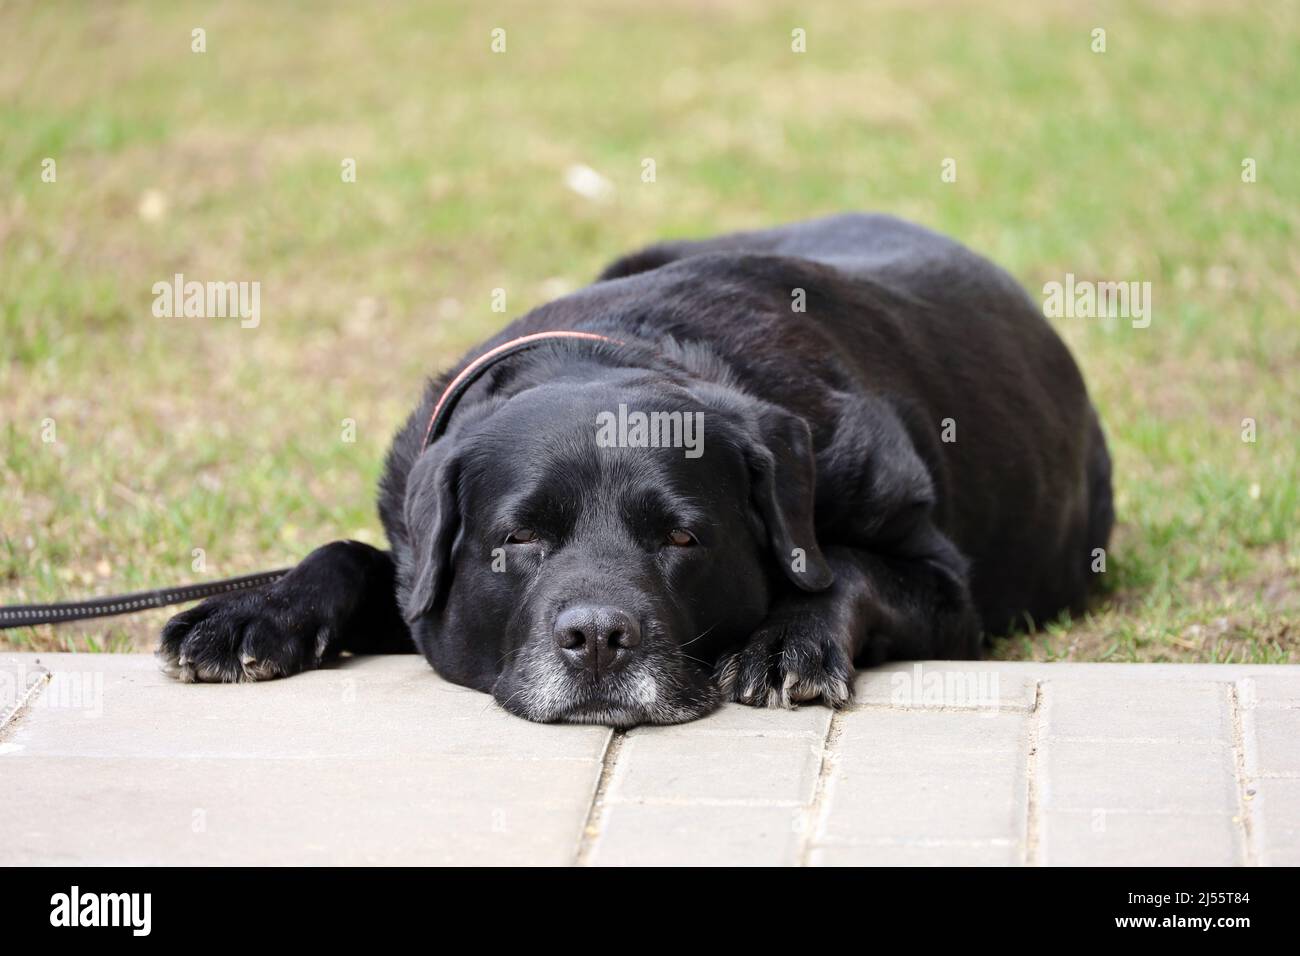 Labrador retriever lying on a lawn. Black dog wearing a collar waiting for the owner on a street Stock Photo